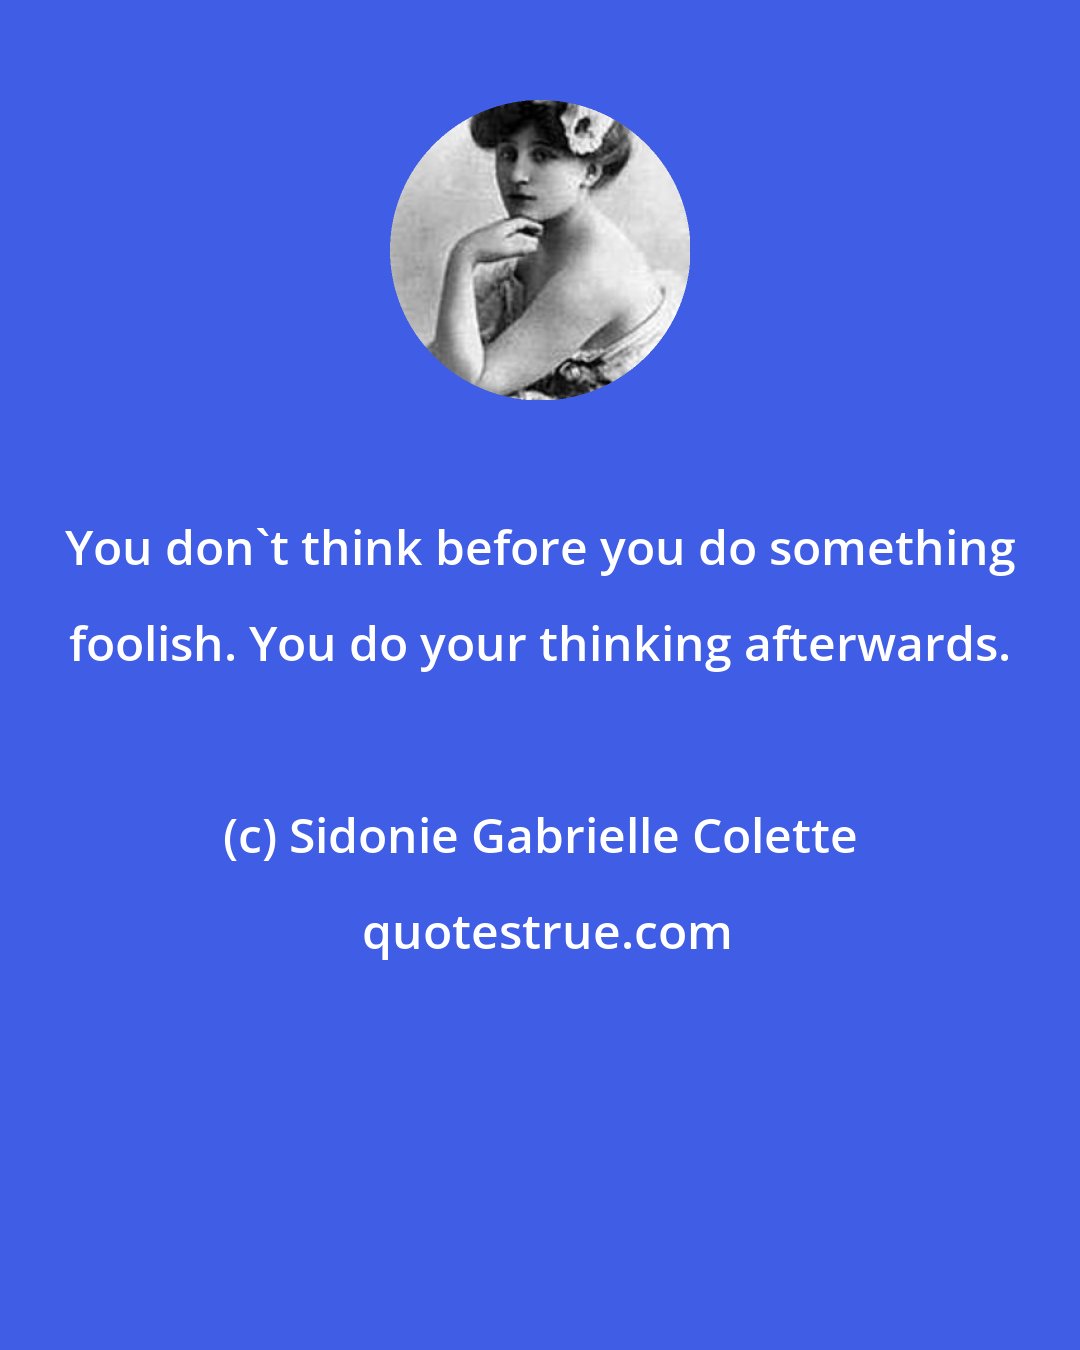 Sidonie Gabrielle Colette: You don't think before you do something foolish. You do your thinking afterwards.